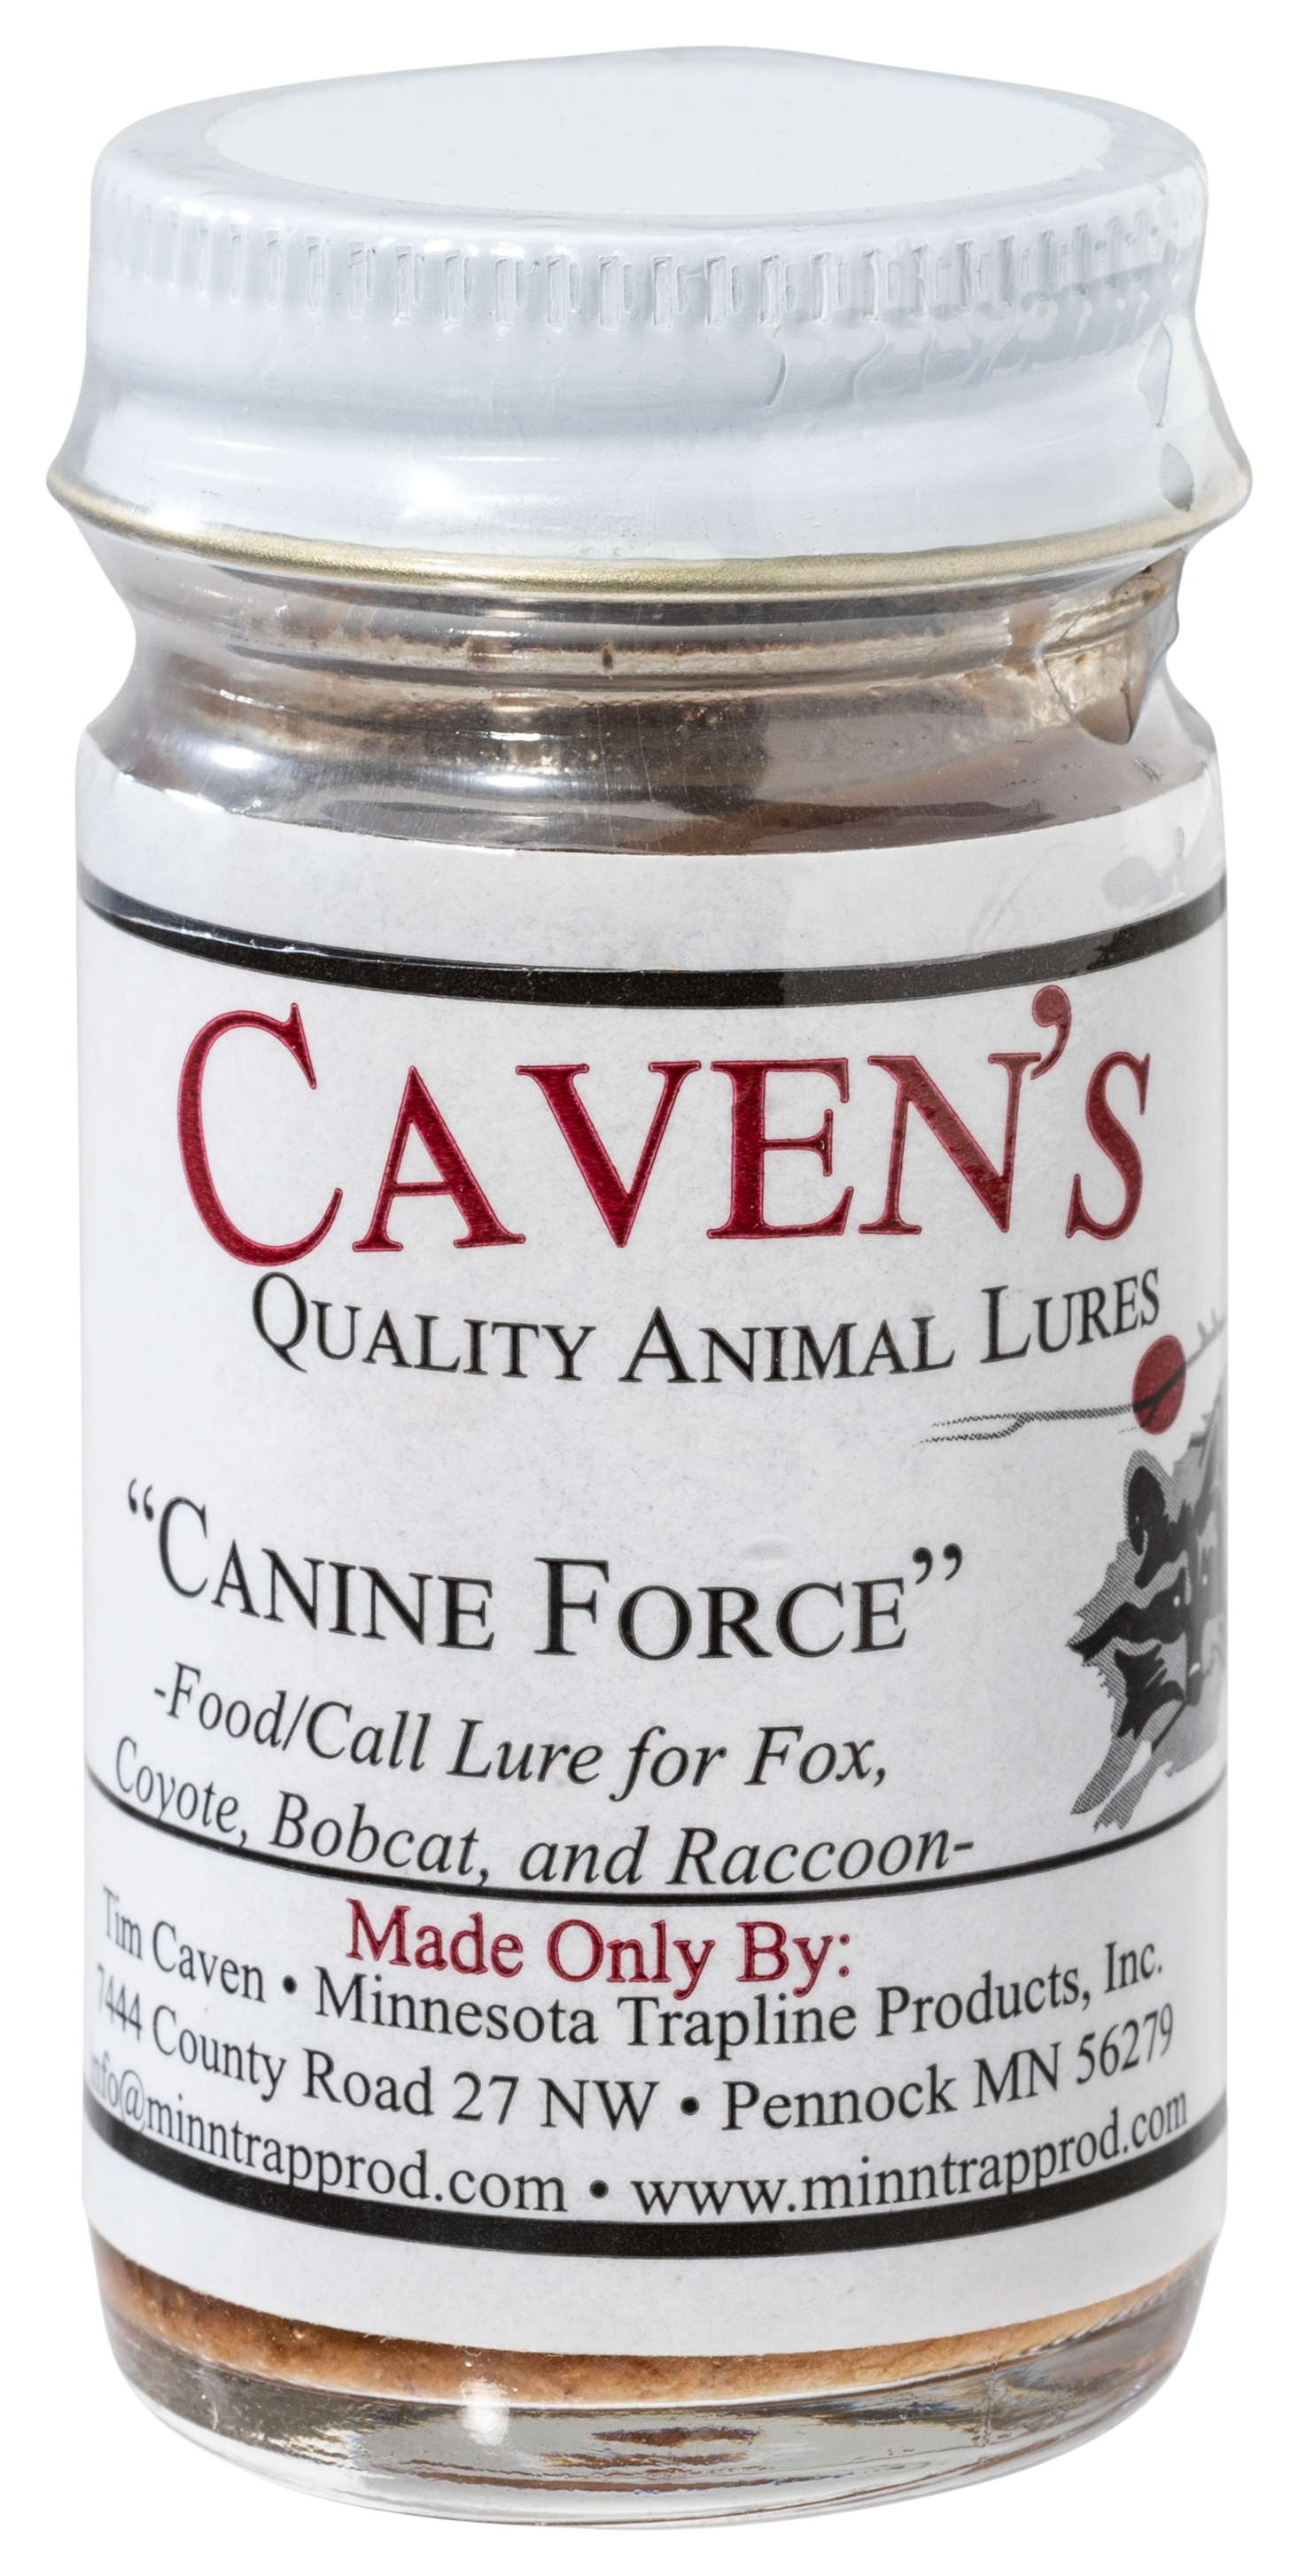 Caven's Canine Force Food and Call Trapping Lure